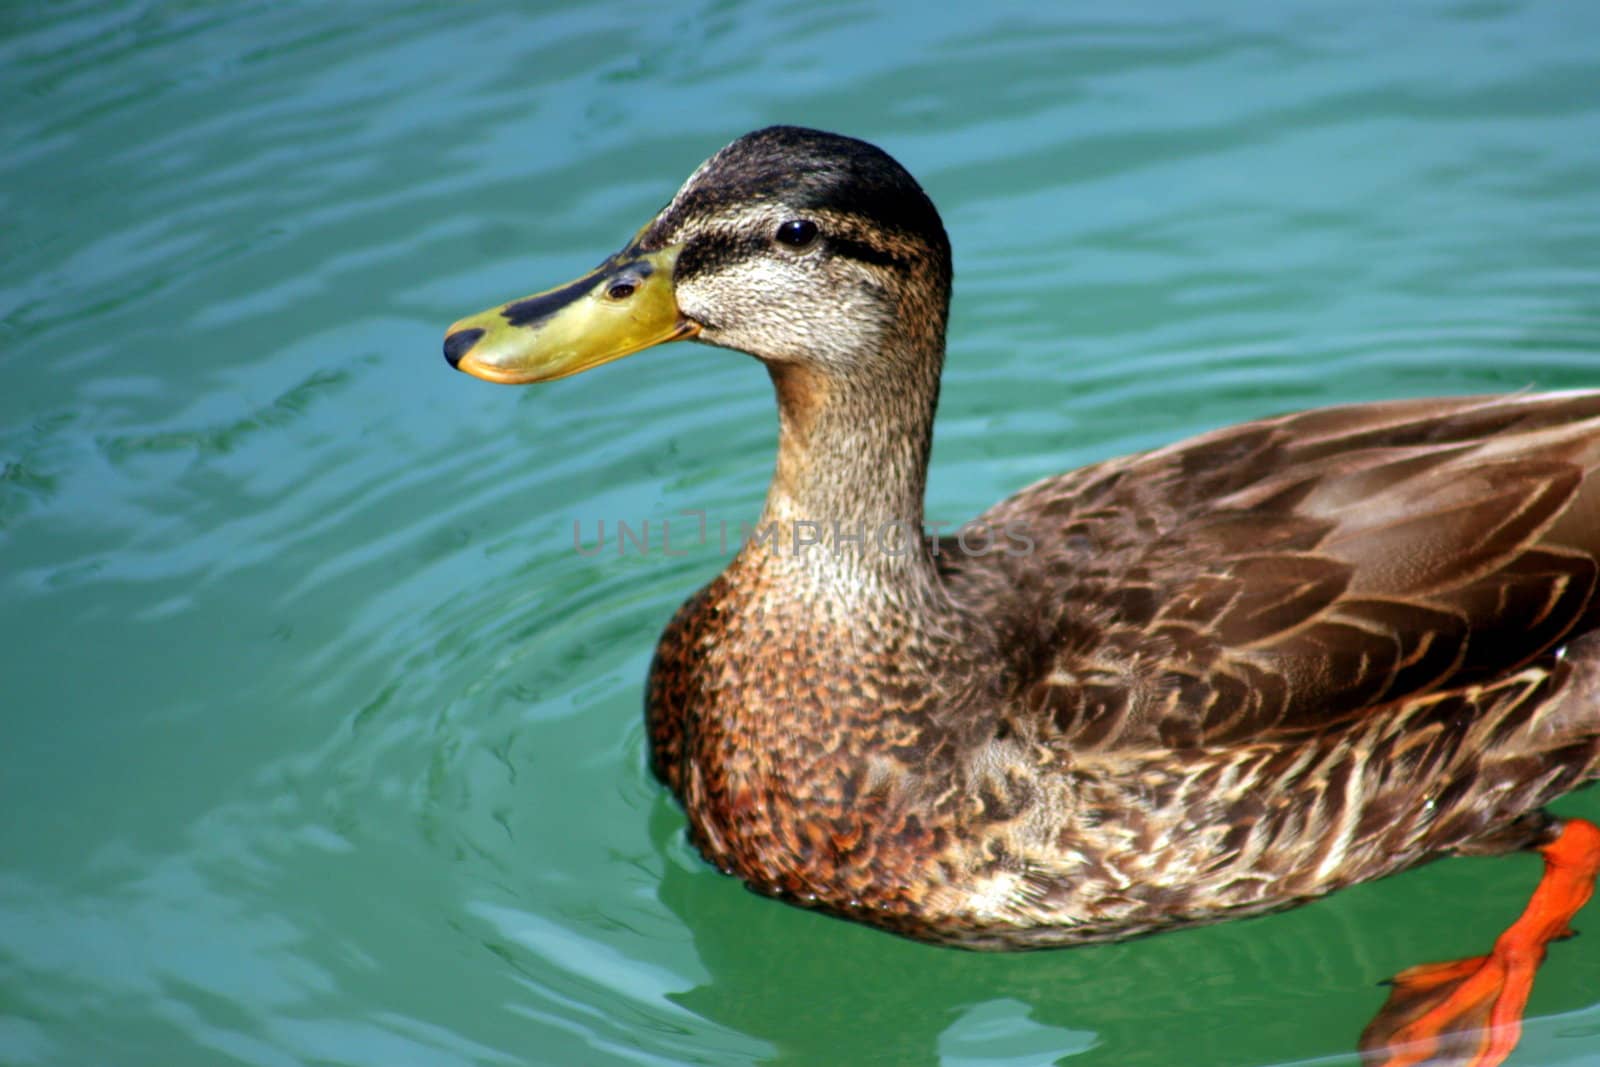 A duck swimming in a lake looking up